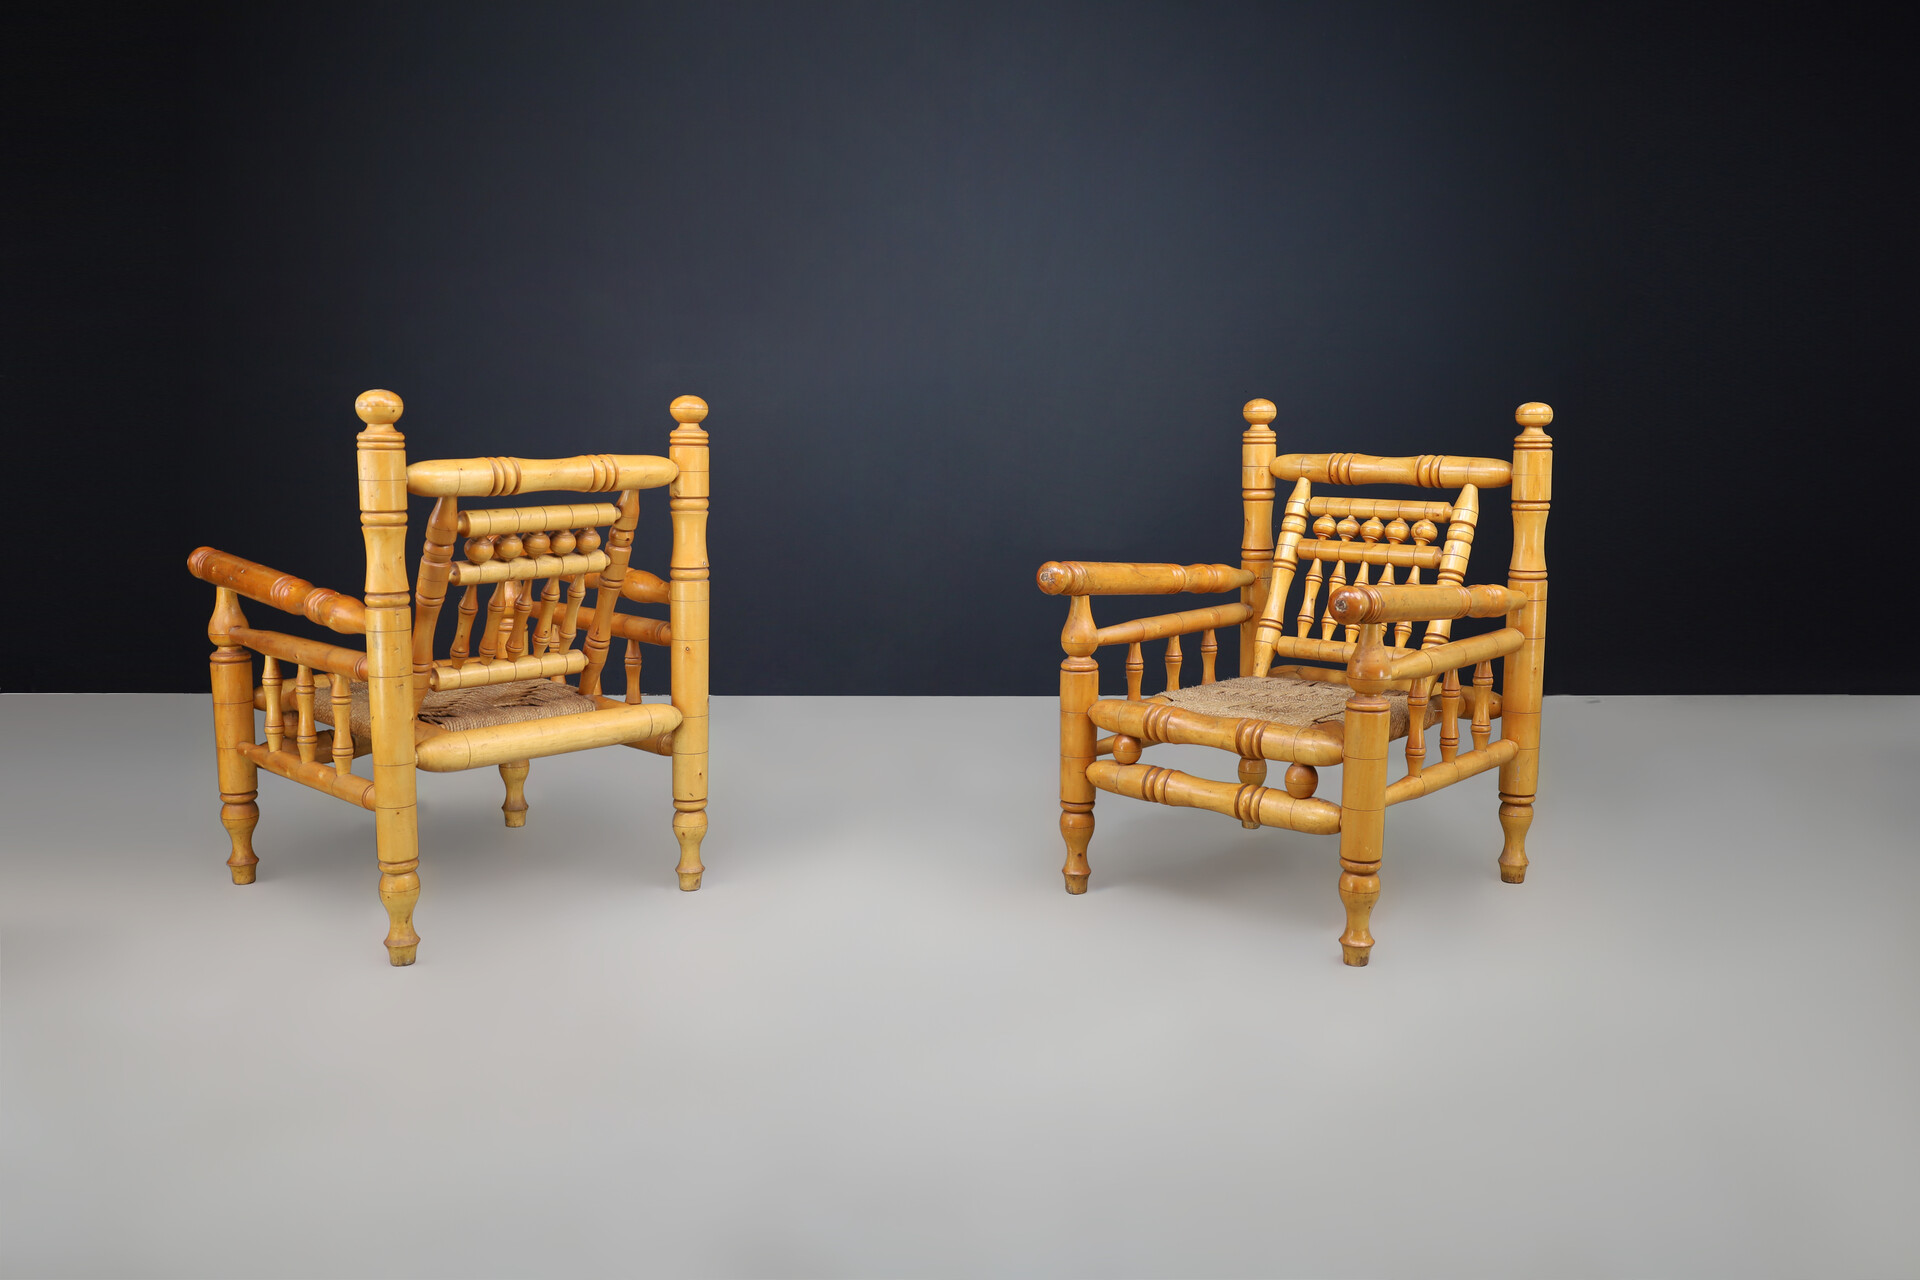 Mid century modern Adrien Audoux and Frida Minet beech and rope Lounge Chairs set/2, France 1950 Mid-20th century